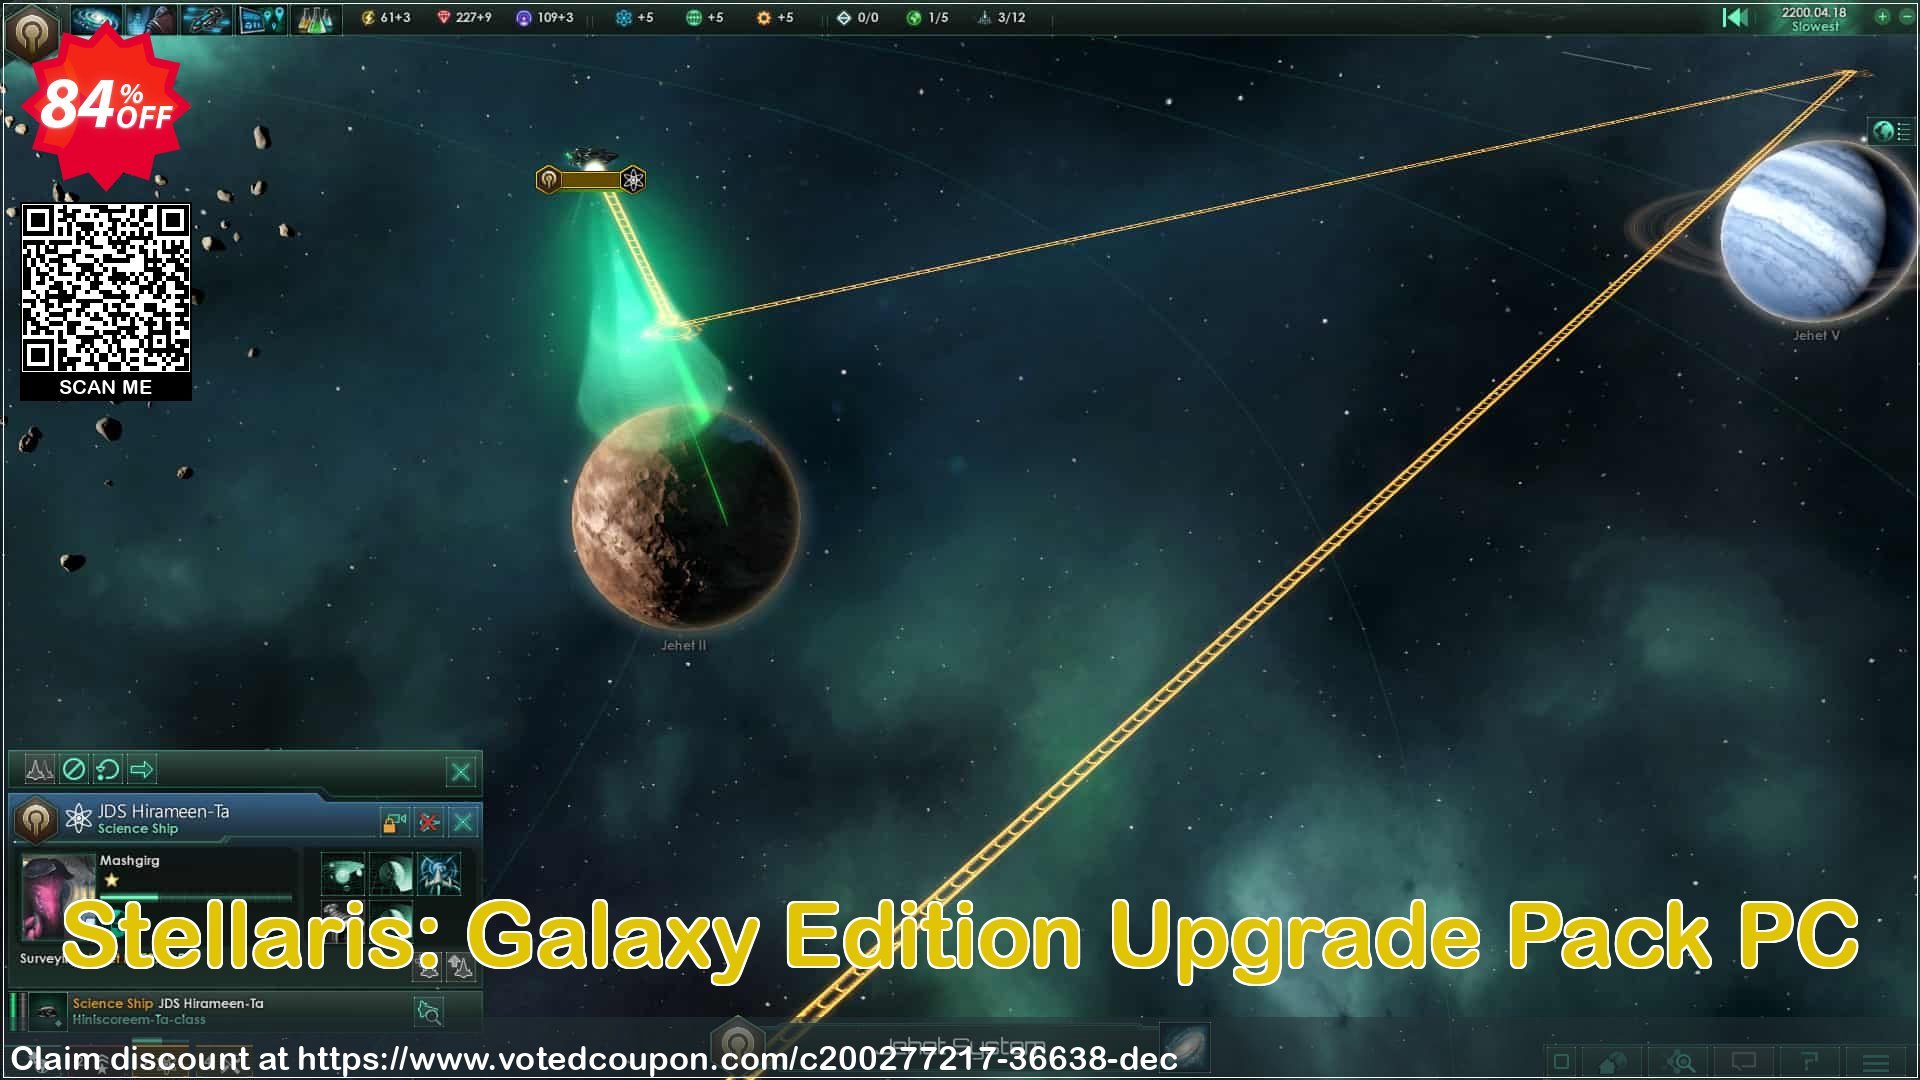 Stellaris: Galaxy Edition Upgrade Pack PC Coupon Code Apr 2024, 84% OFF - VotedCoupon